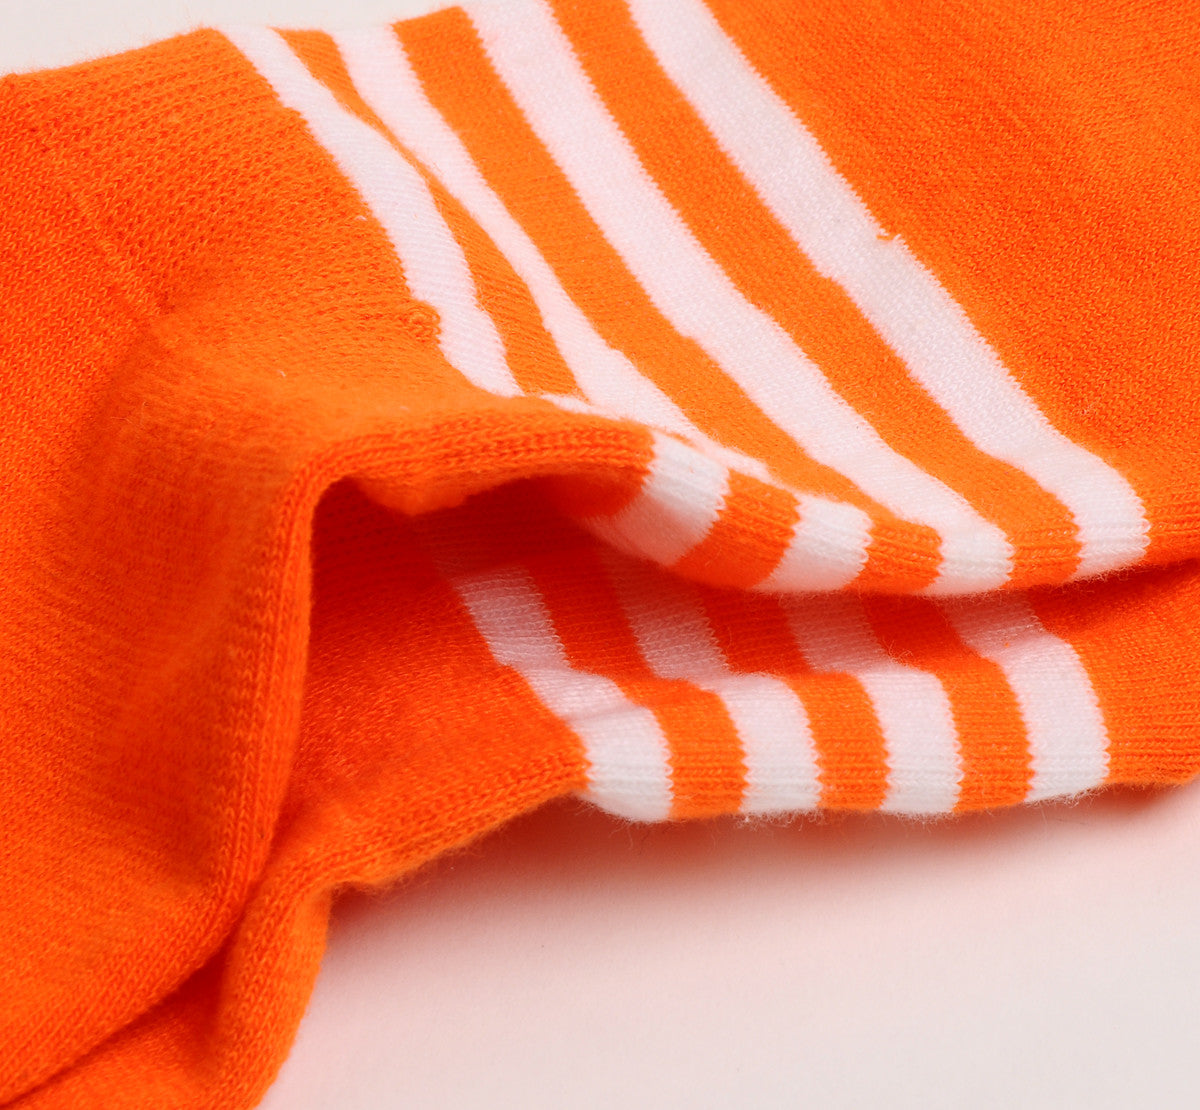 2 Pairs Finest Combed Cotton Invisible Socks Striped Orange